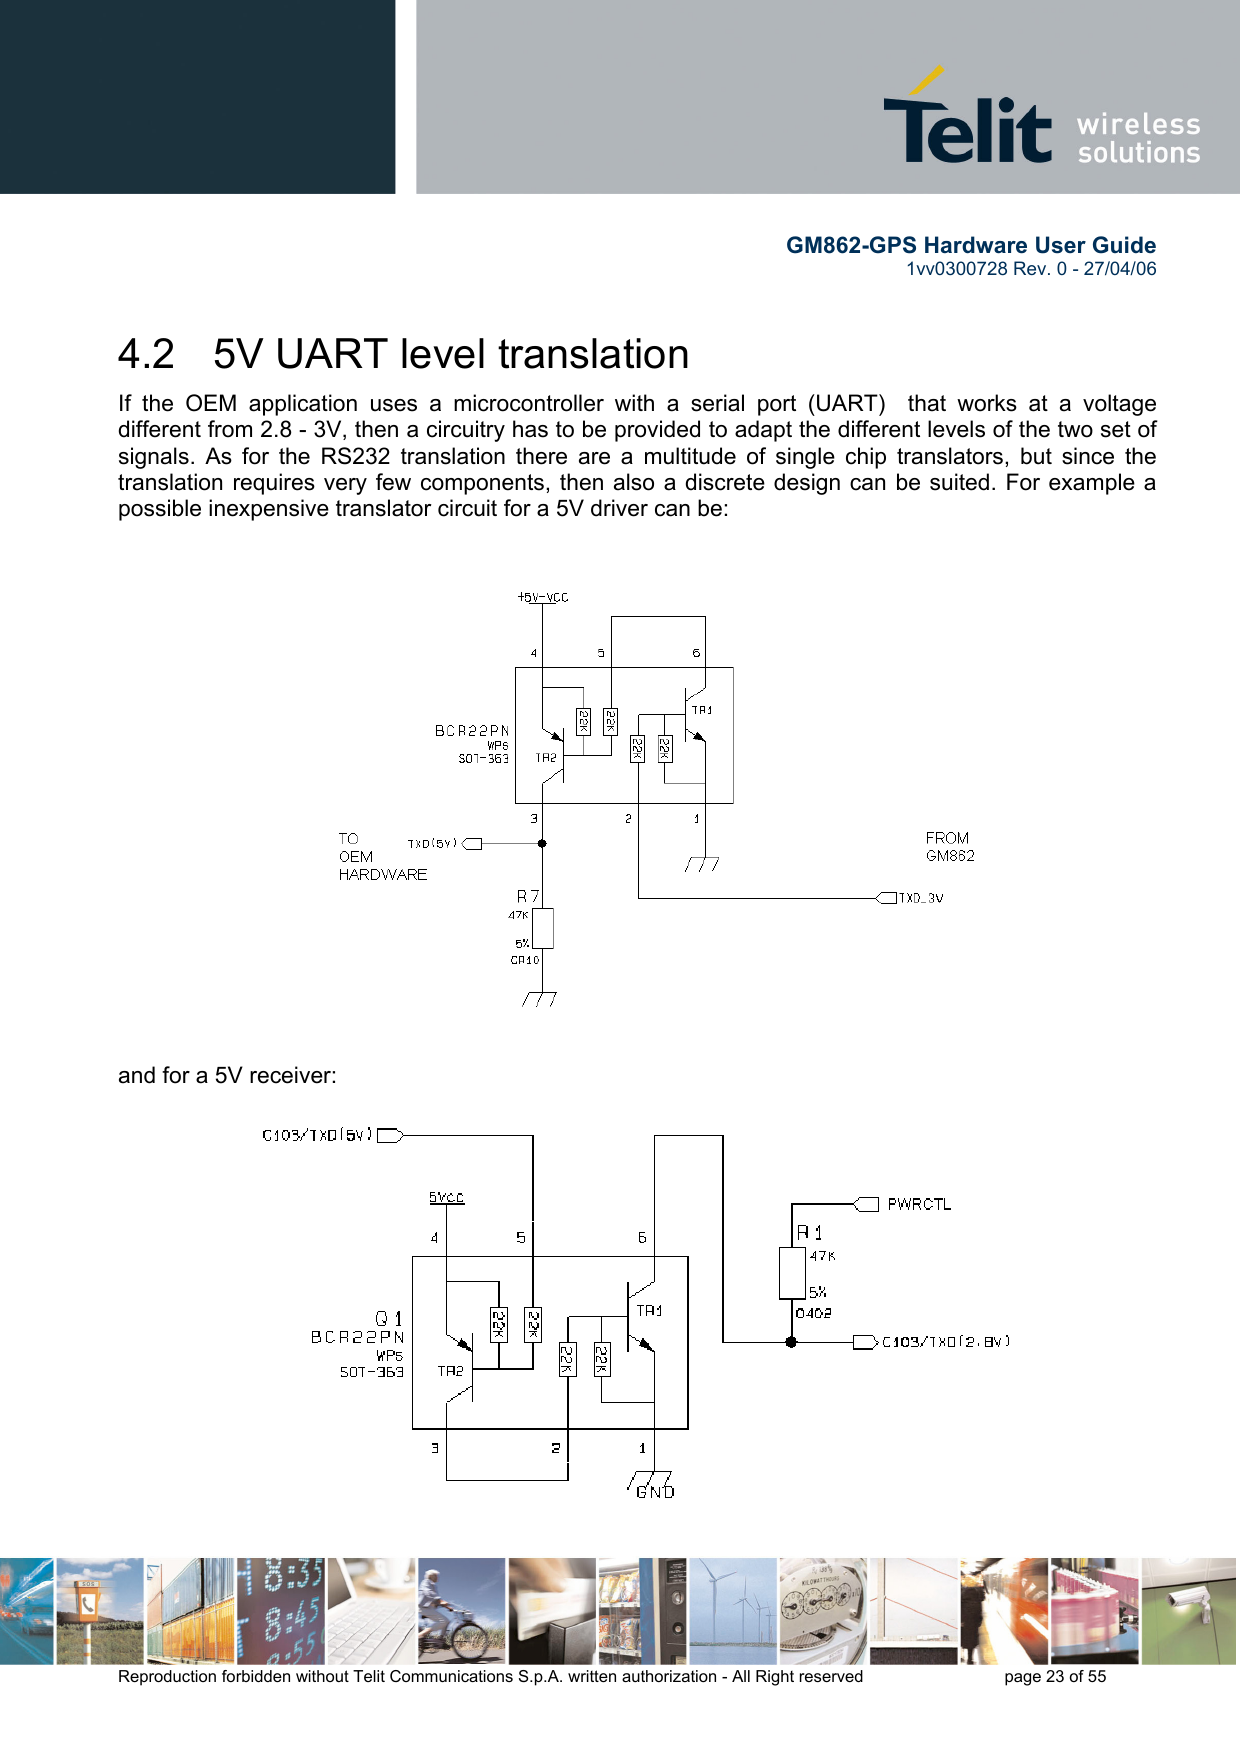        GM862-GPS Hardware User Guide   1vv0300728 Rev. 0 - 27/04/06    Reproduction forbidden without Telit Communications S.p.A. written authorization - All Right reserved    page 23 of 55  4.2   5V UART level translation If the OEM application uses a microcontroller with a serial port (UART)  that works at a voltage different from 2.8 - 3V, then a circuitry has to be provided to adapt the different levels of the two set of signals. As for the RS232 translation there are a multitude of single chip translators, but since the translation requires very few components, then also a discrete design can be suited. For example a possible inexpensive translator circuit for a 5V driver can be:   and for a 5V receiver:  